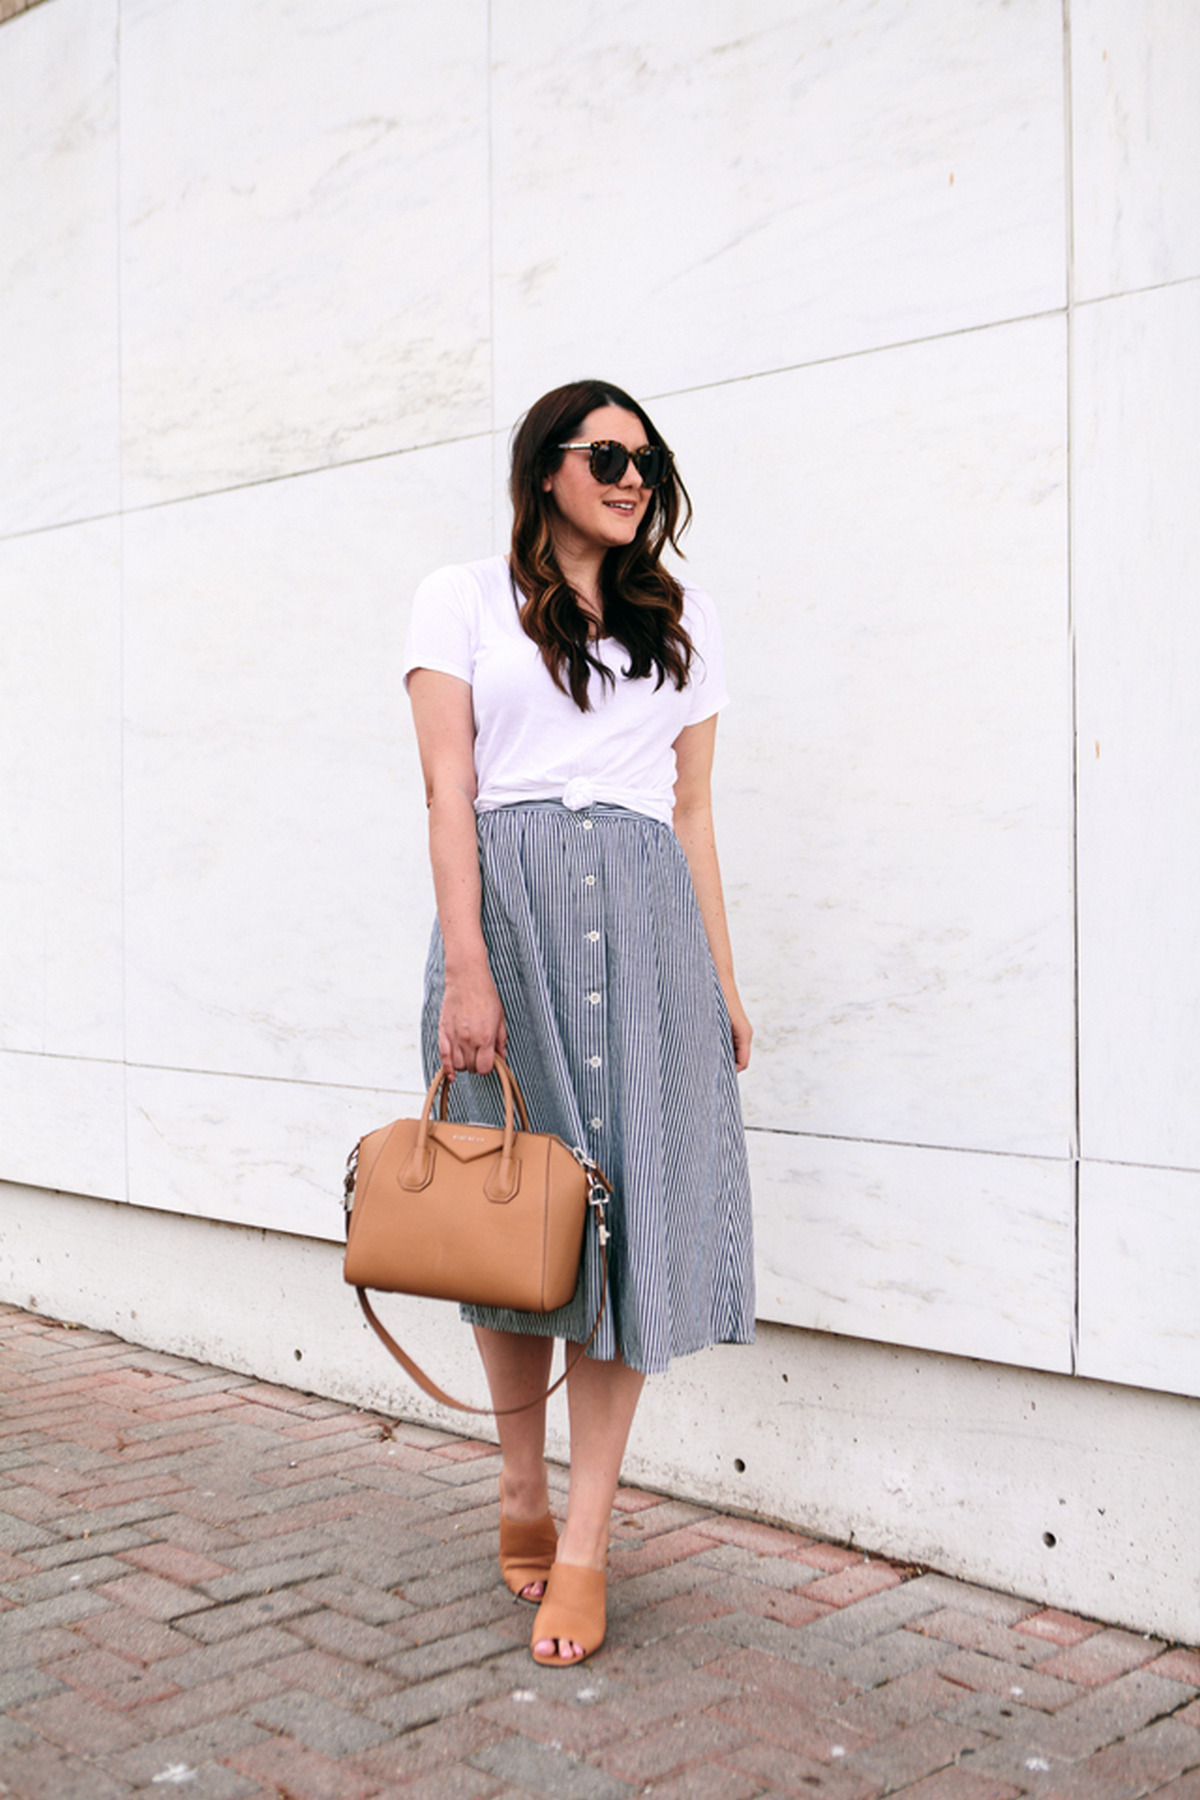 Mules With A Simple Dark T-Shirt Tucked In A Midi Skirt